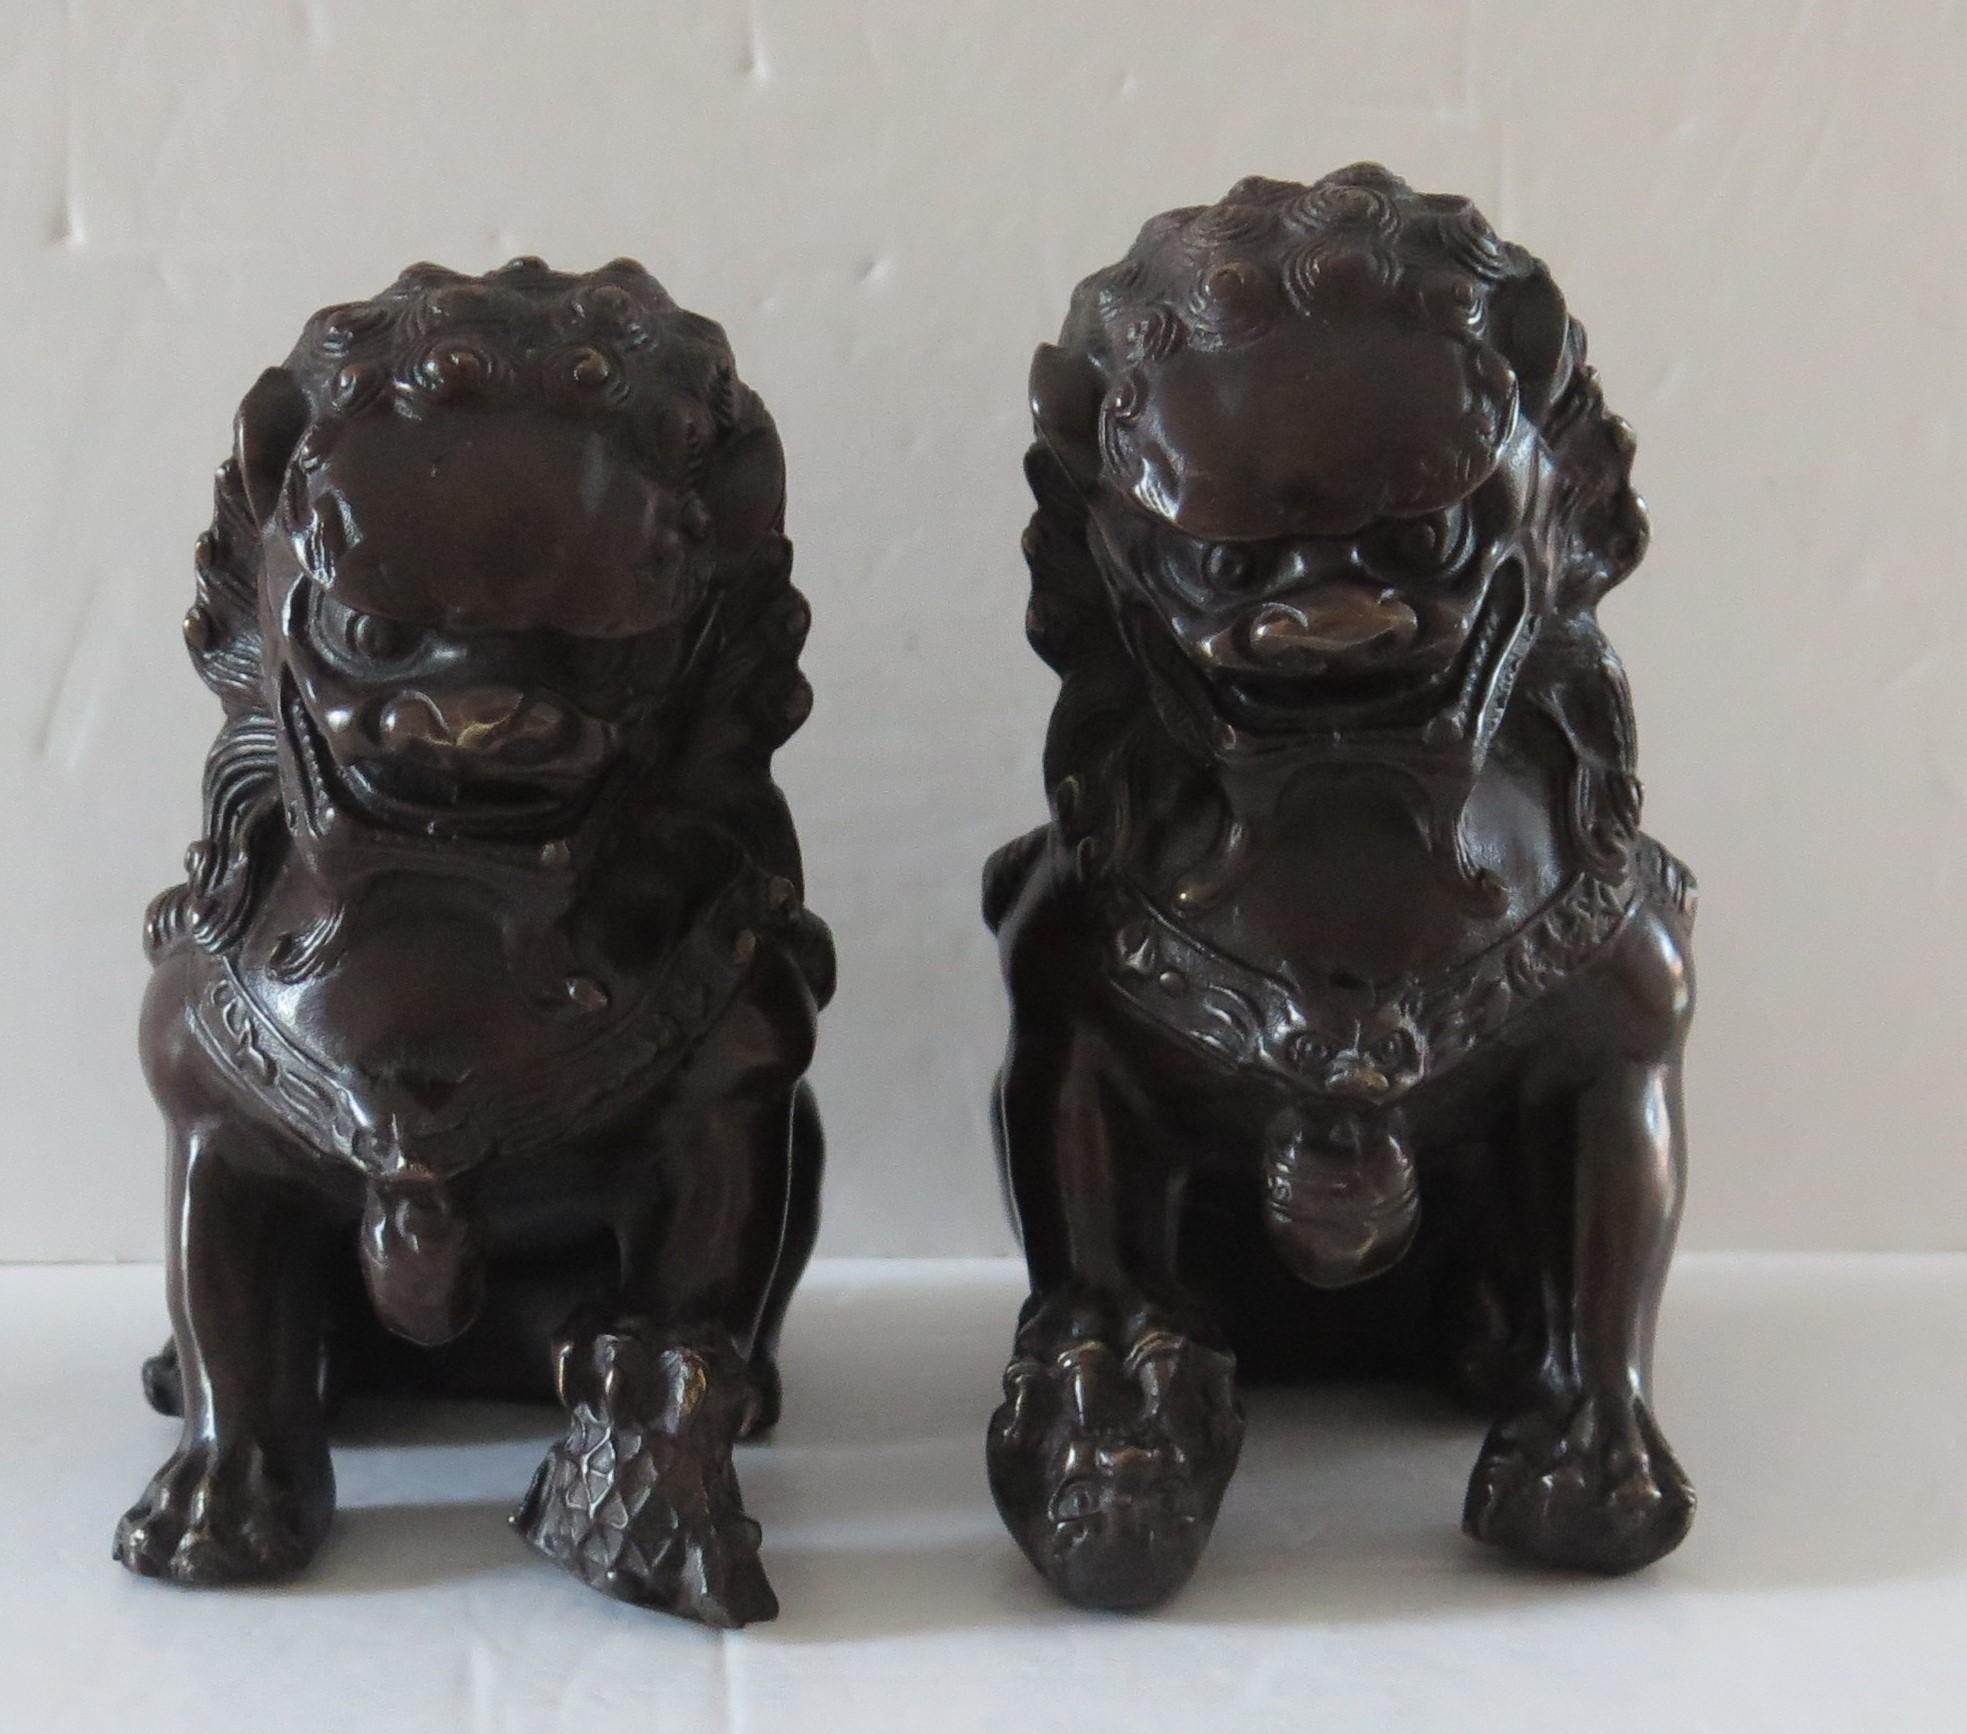 20th Century Pair of Chinese Bronze Foo or Lion Dogs Good Detail, Circa 1920s